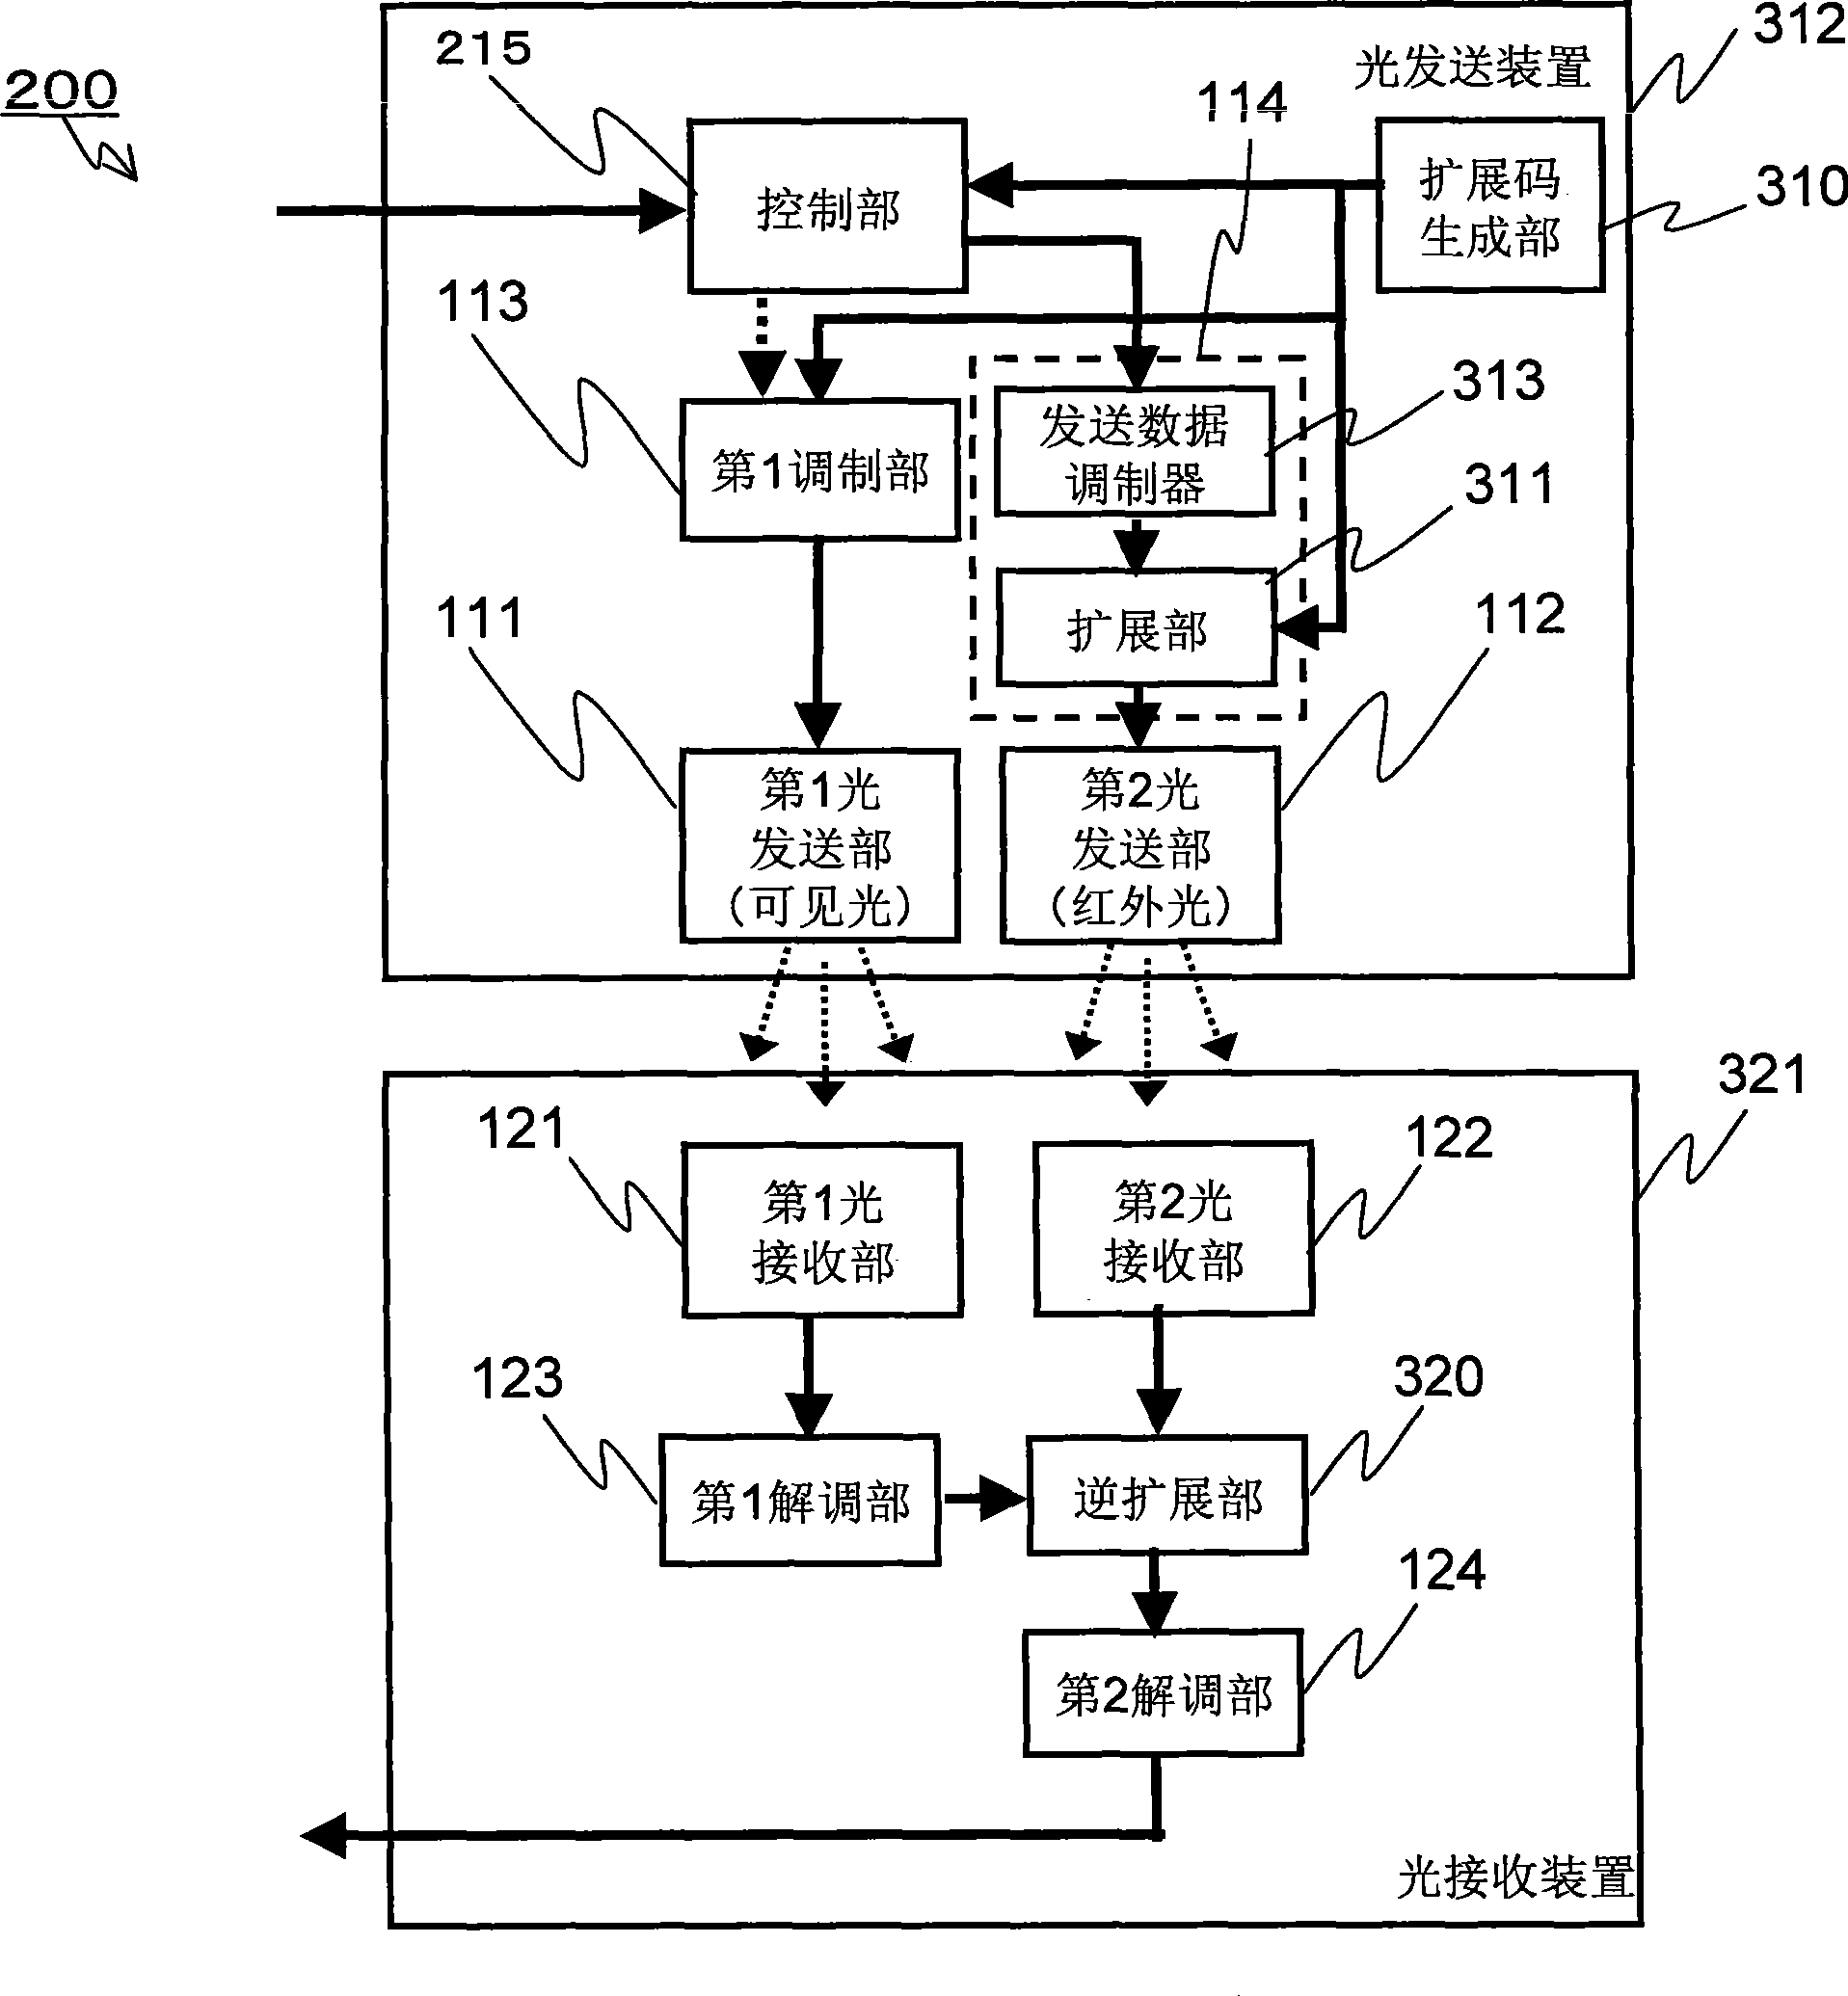 Optical space transmission system using visible light and infrared light